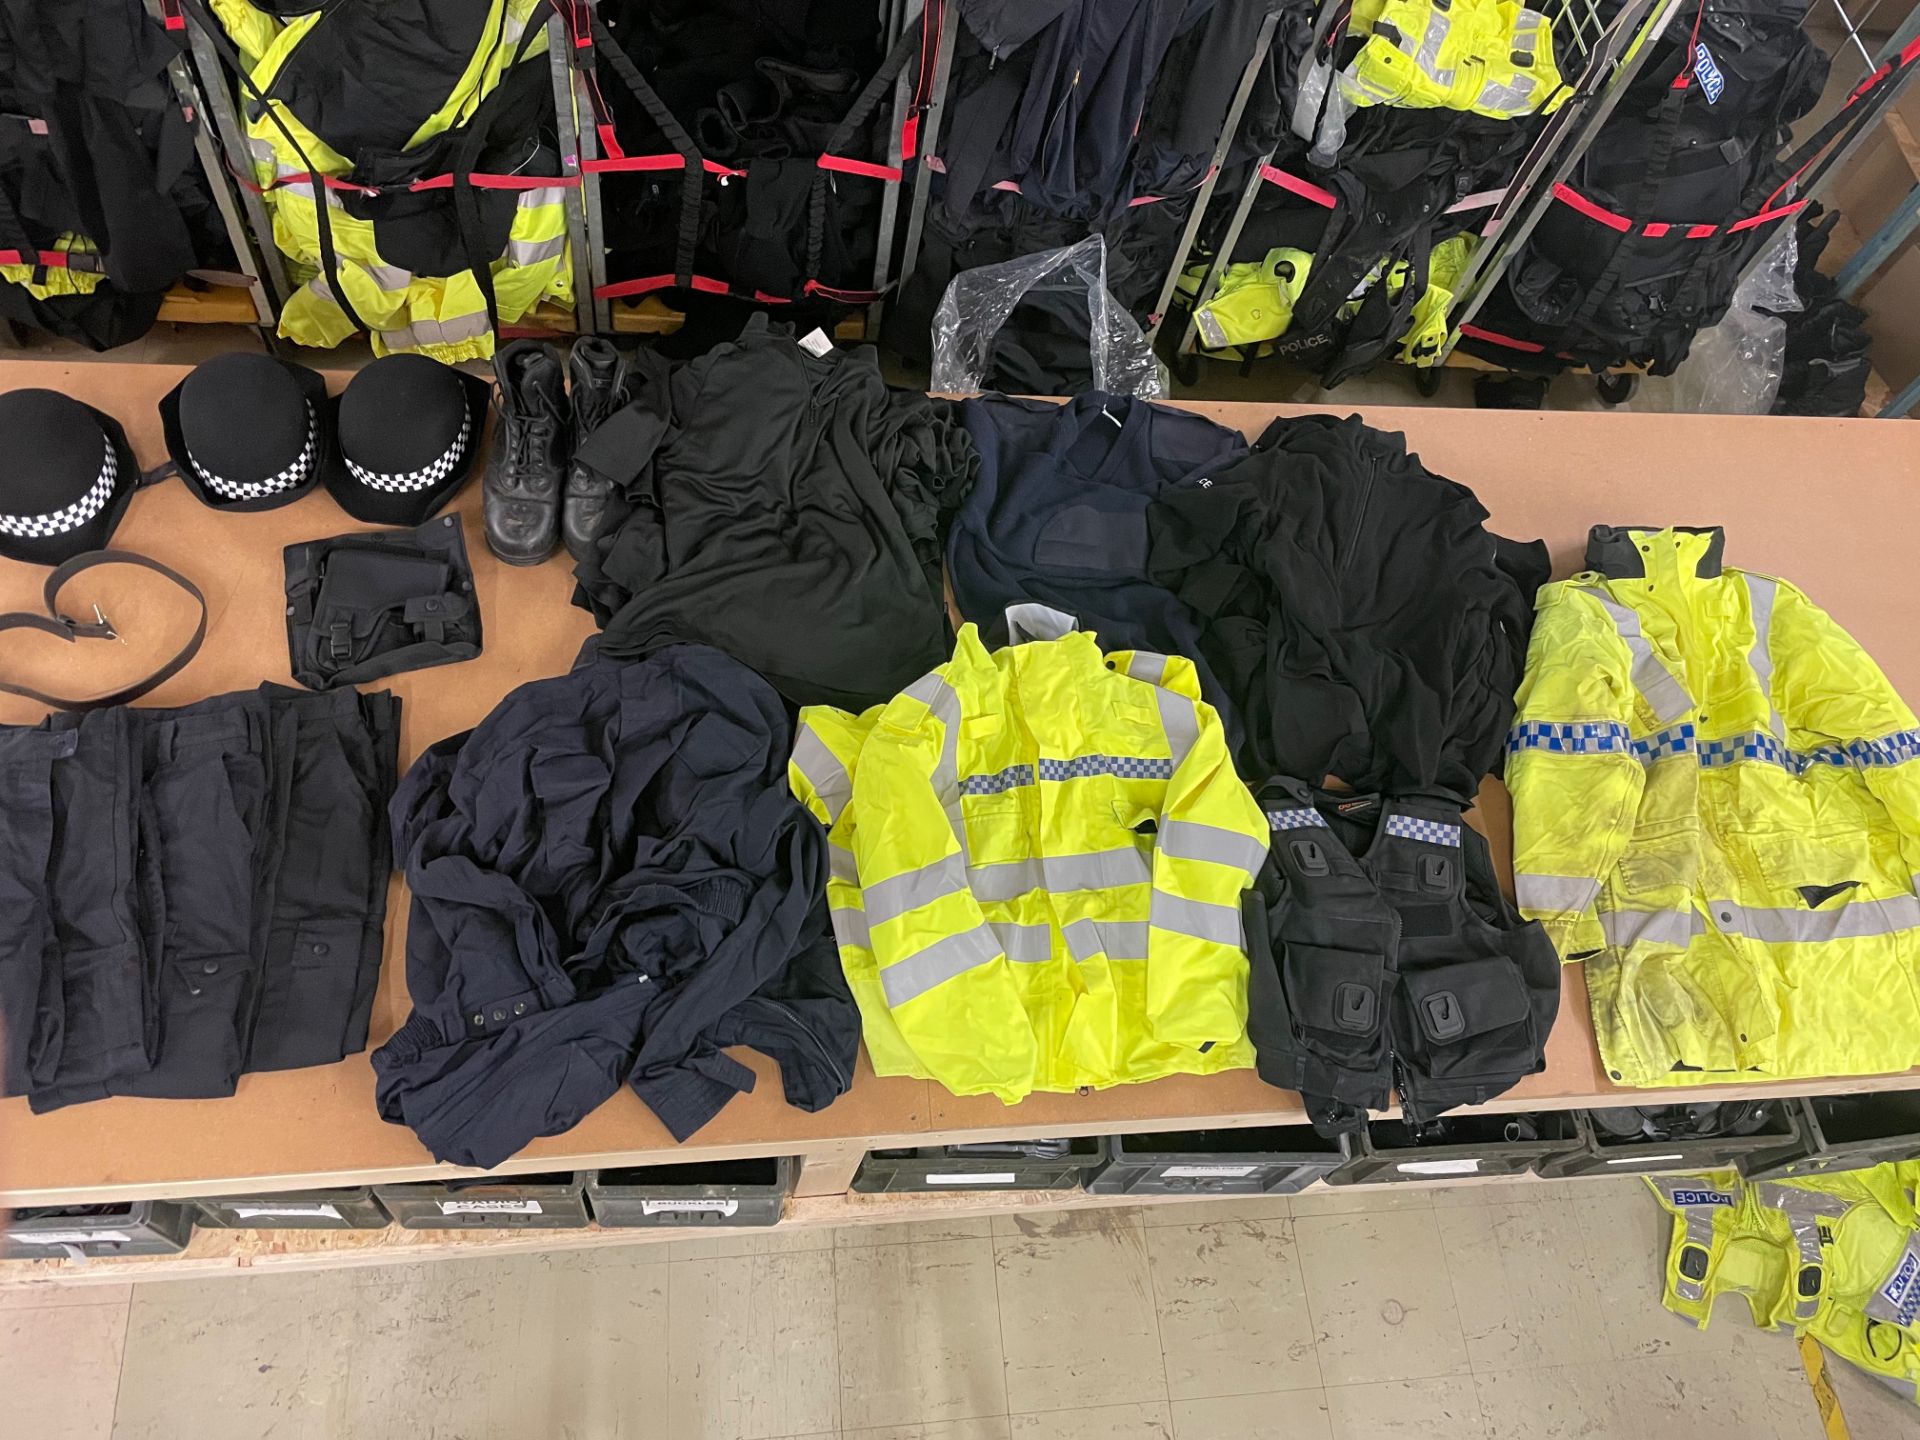 SINGLE BAG MIXED POLICE CLOTHING & ACCESSORIES - RRP £275.00 - Image 5 of 12